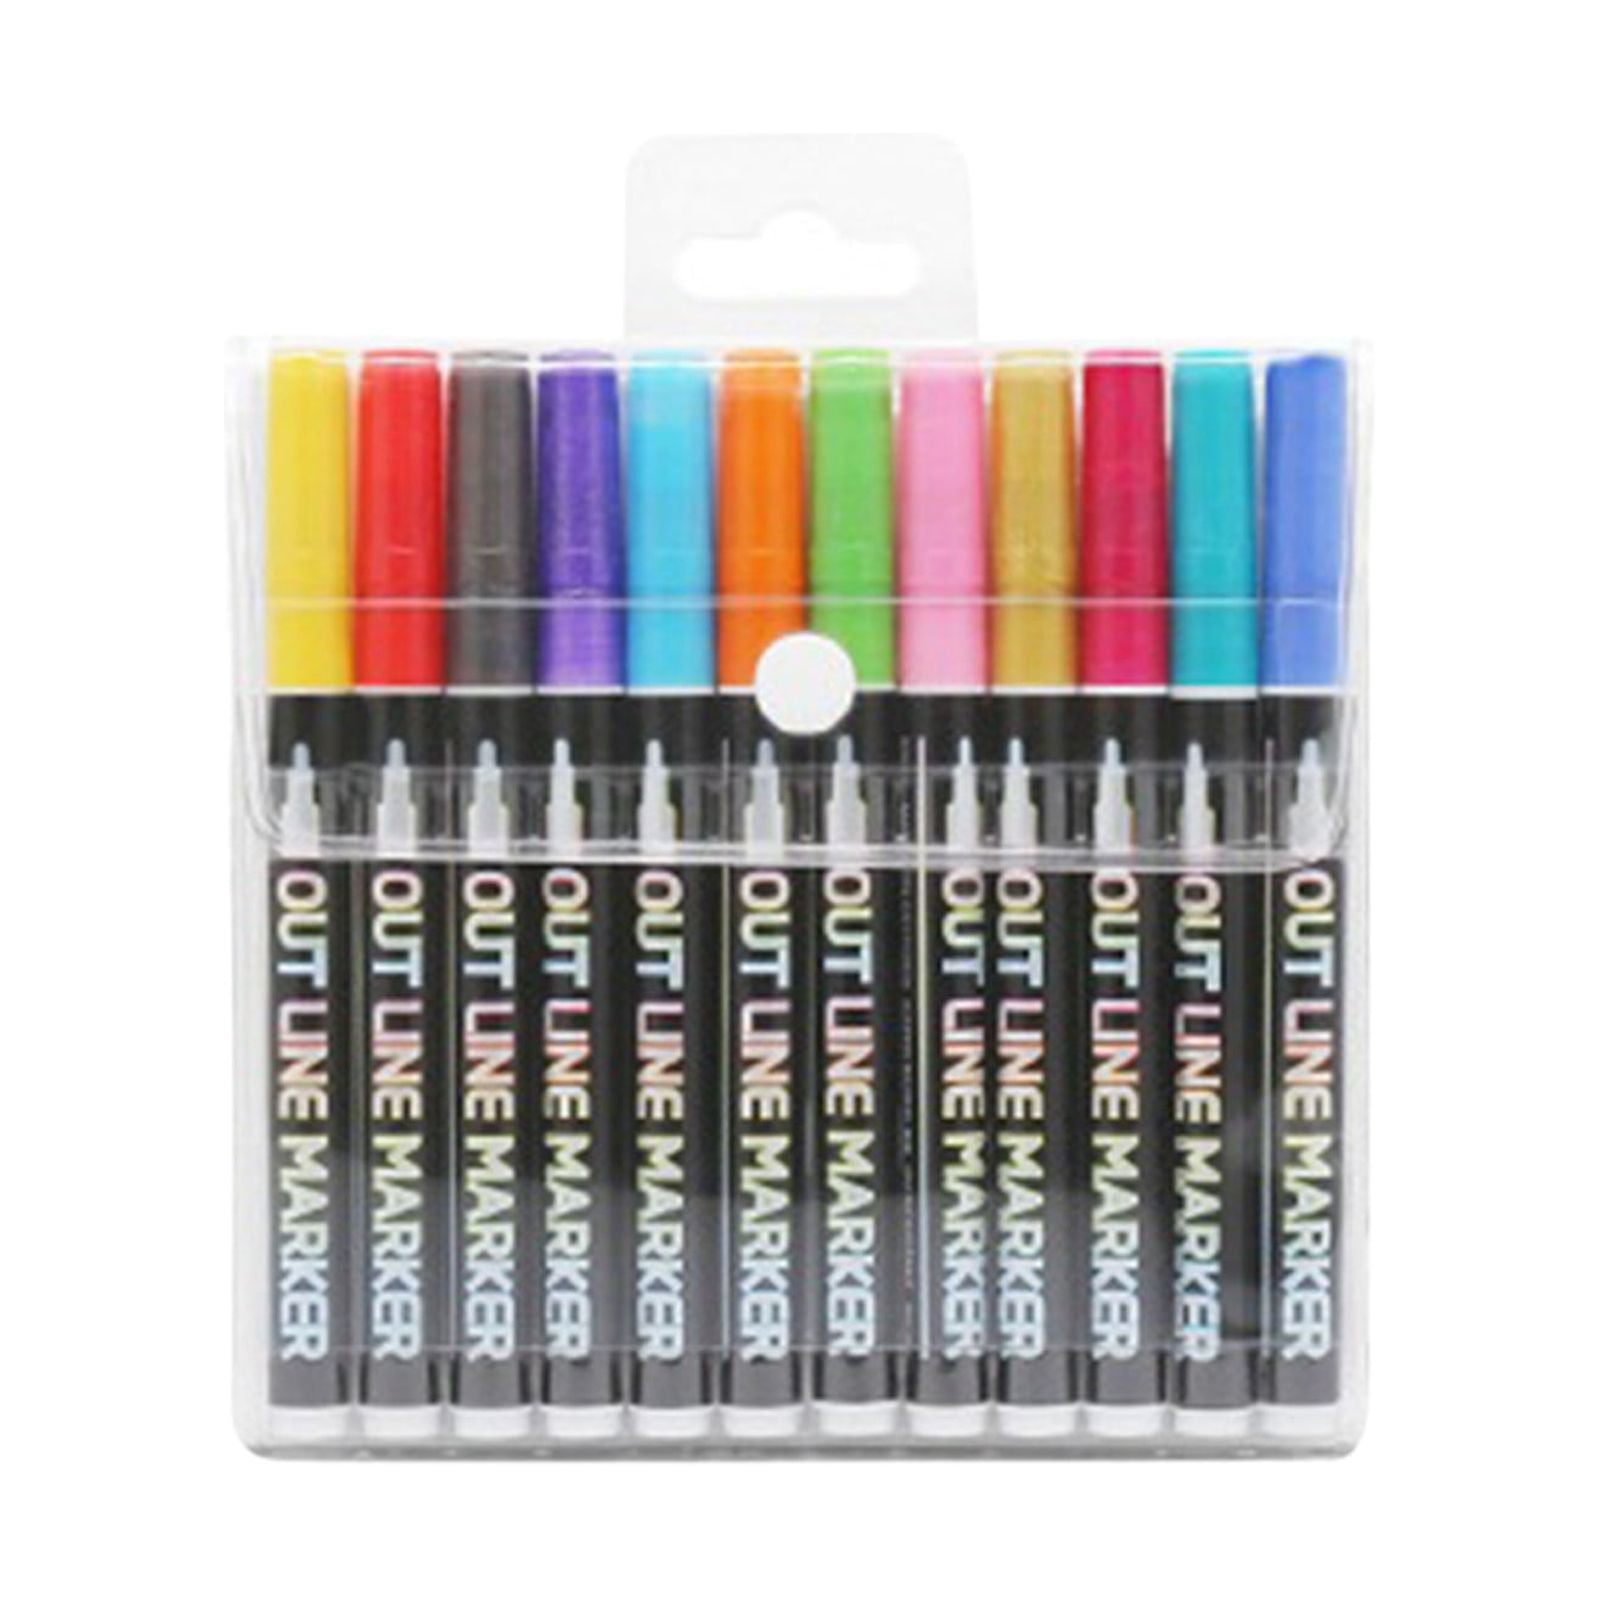 DTBPRQ Gel Pens, Colored Pencils 12 Colors Outline Markers Pens, Super  Squiggles Double Line Pen, Glitter Drawing Pens For Greeting Cards, Craft